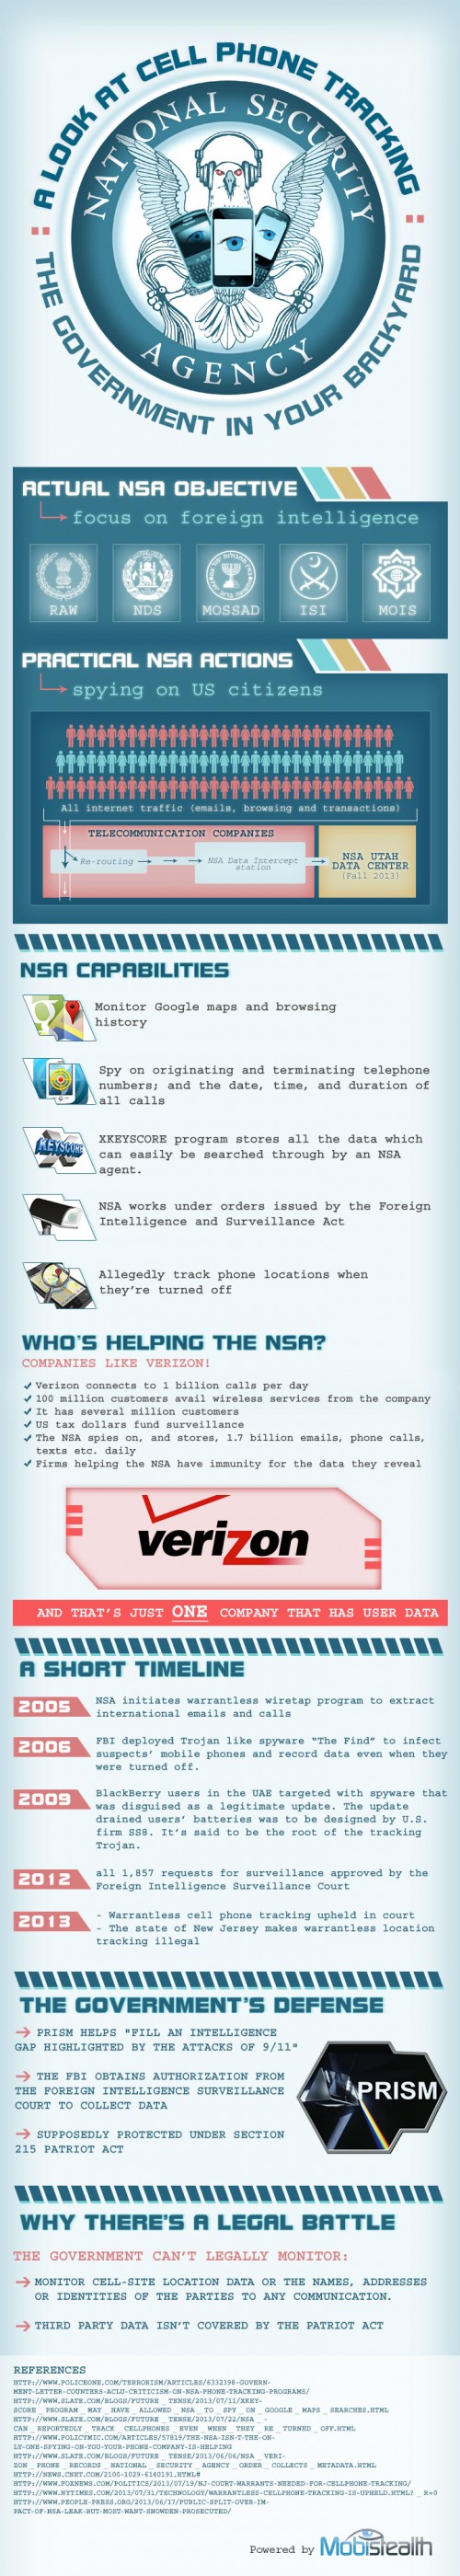 NSA: From Security Provider To Cell Phone Tracker (Infographic)